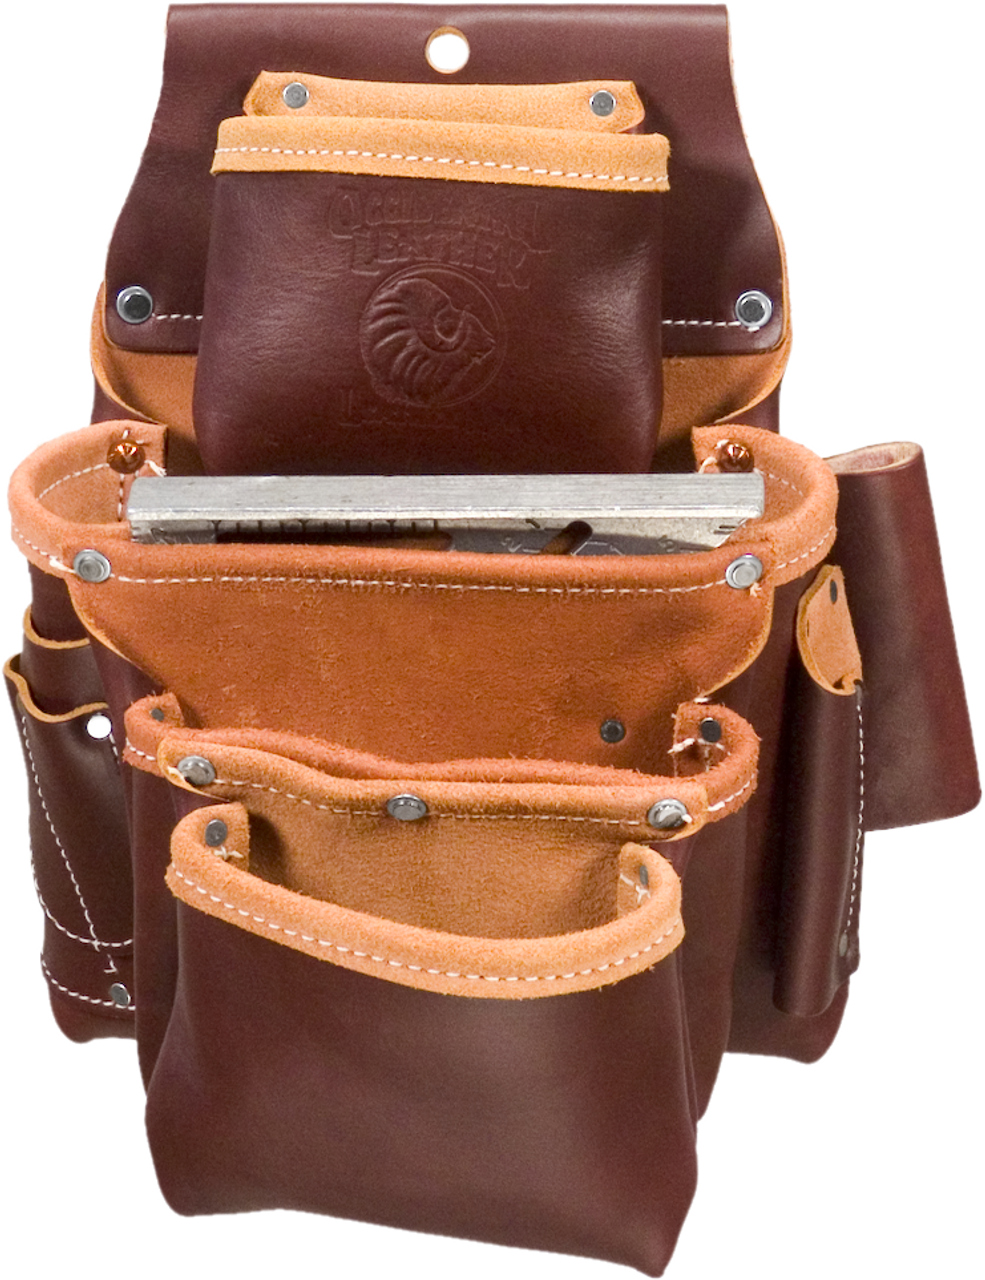 Occidental Leather OCC-5062 4 Pouch Pro Fastener Bag - Atlas-Machinery